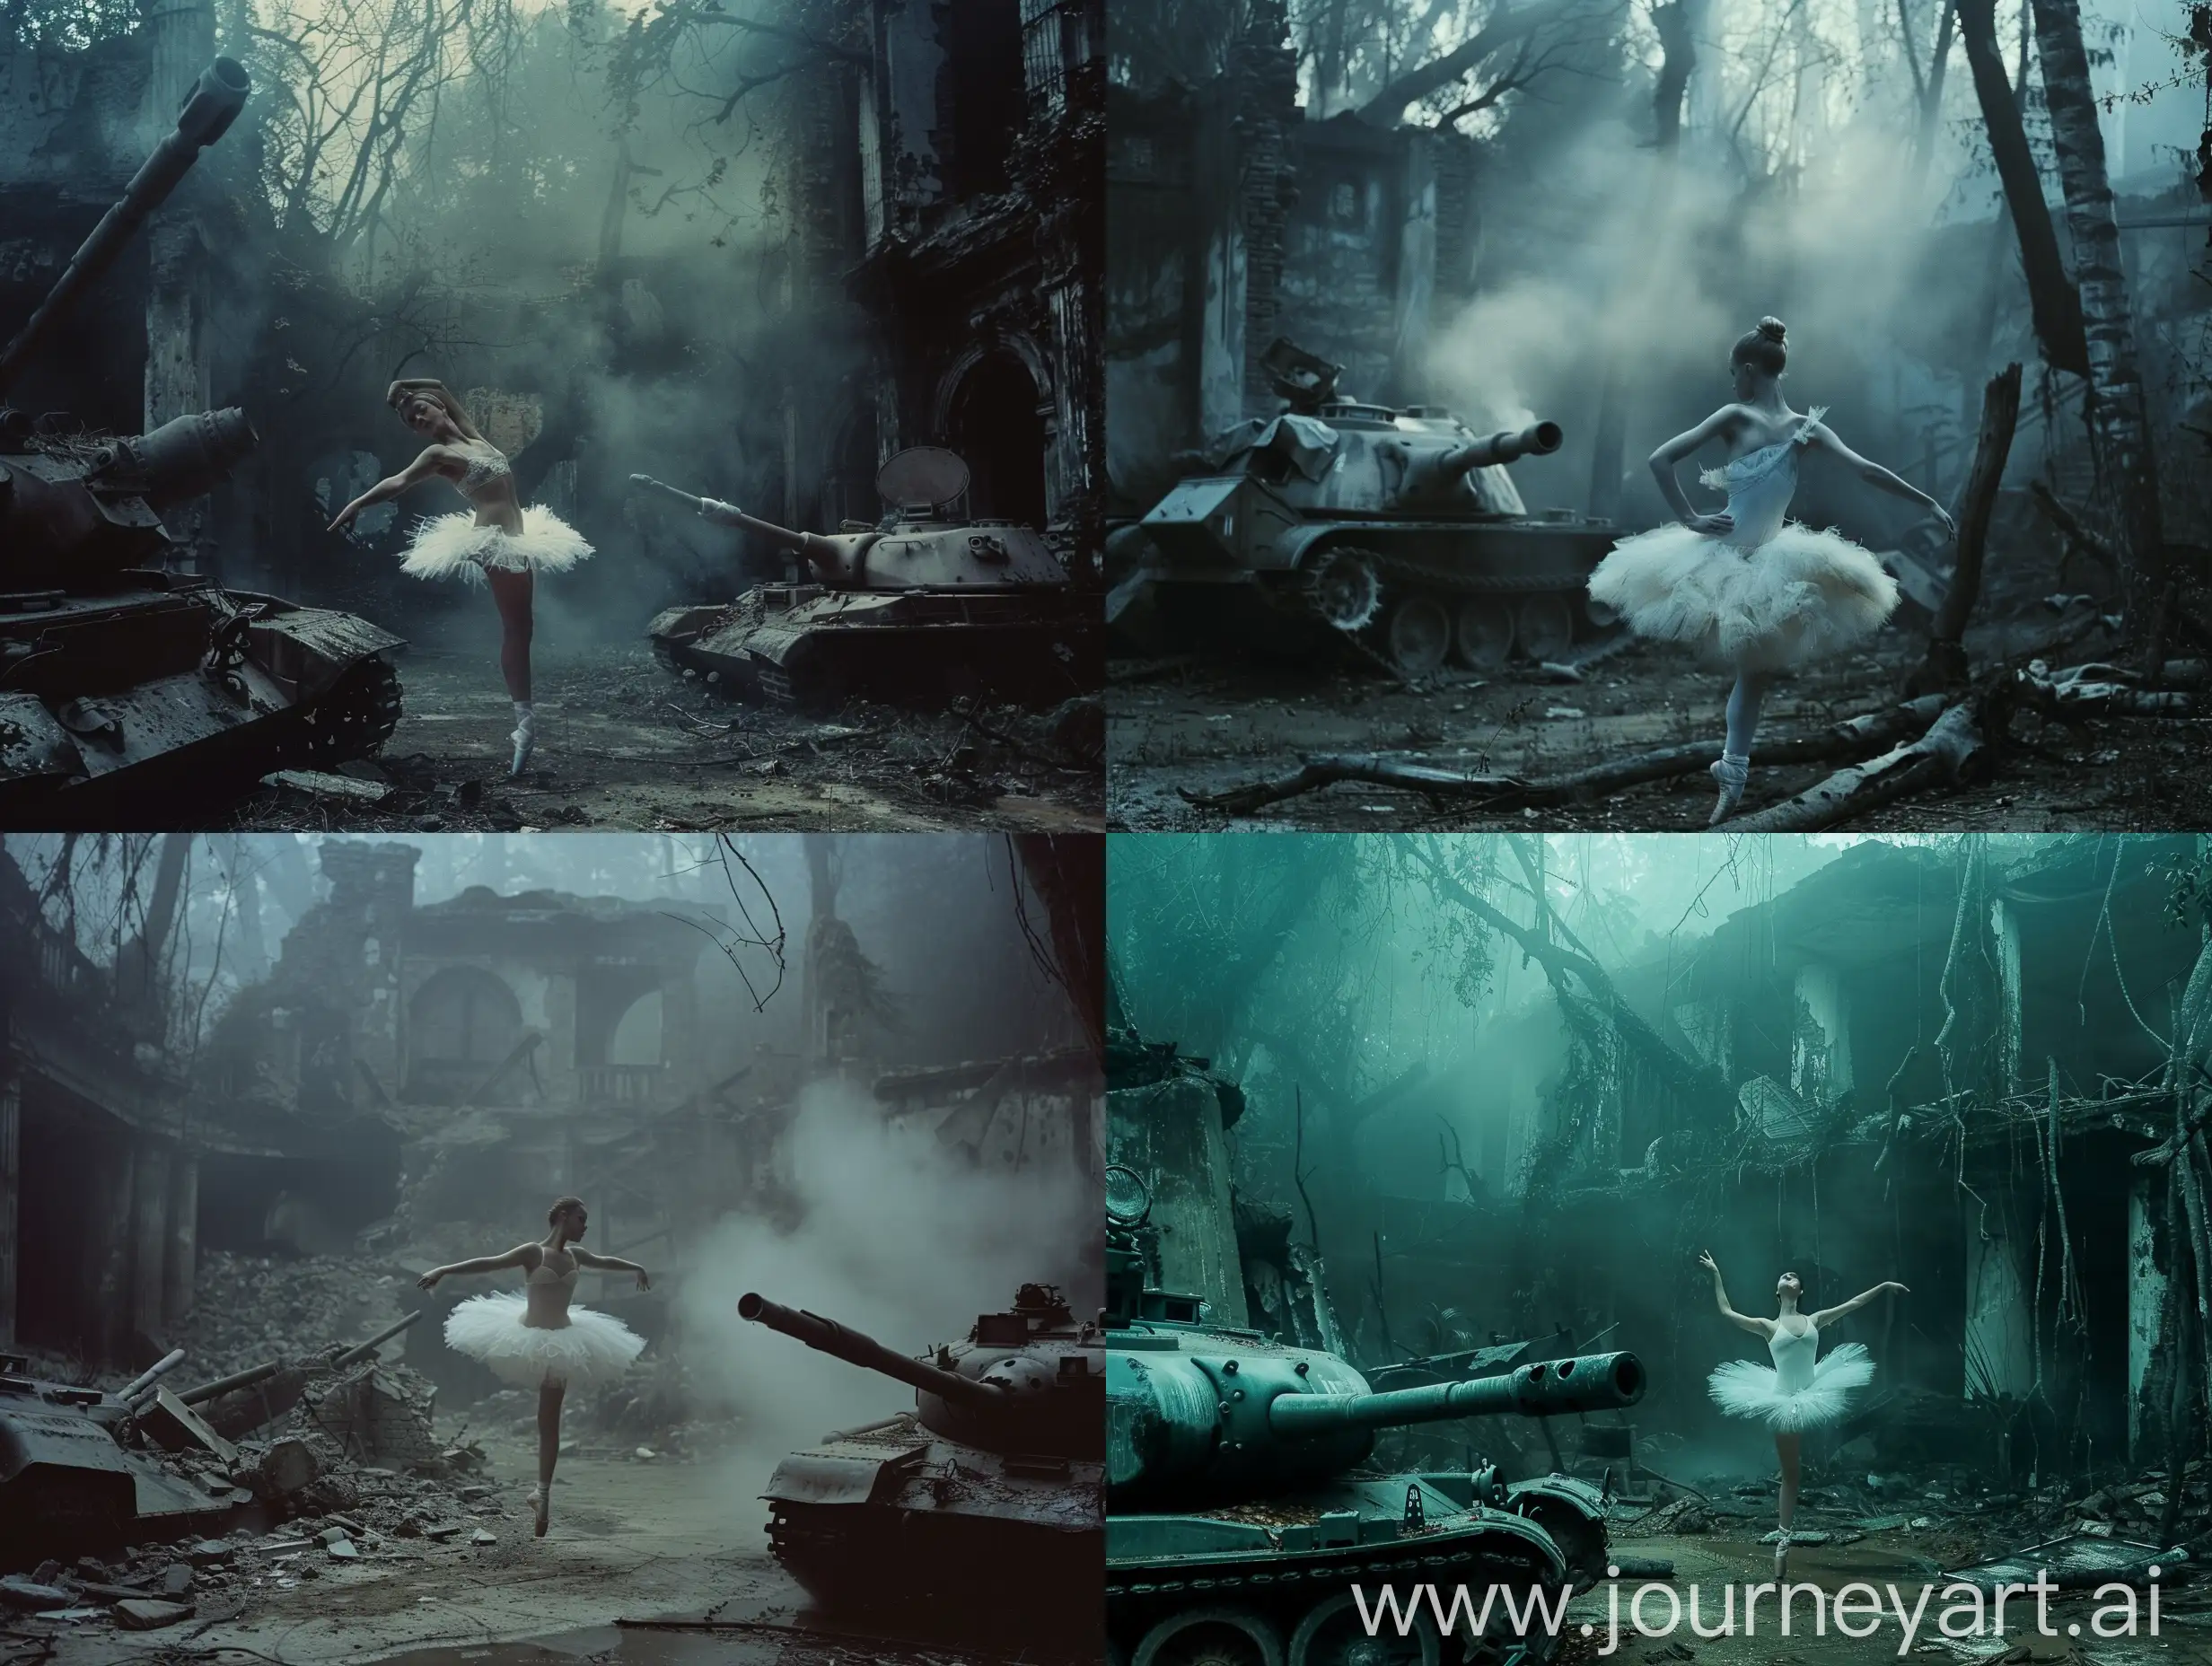 movie still frame Inspired by Steven Klein of decayed medieval sity interior, holga photography, cinema atmosphere. сломанные танки, танцующие балерины,  sad pale white ballerina dancing in a dying forest, darkness smoke